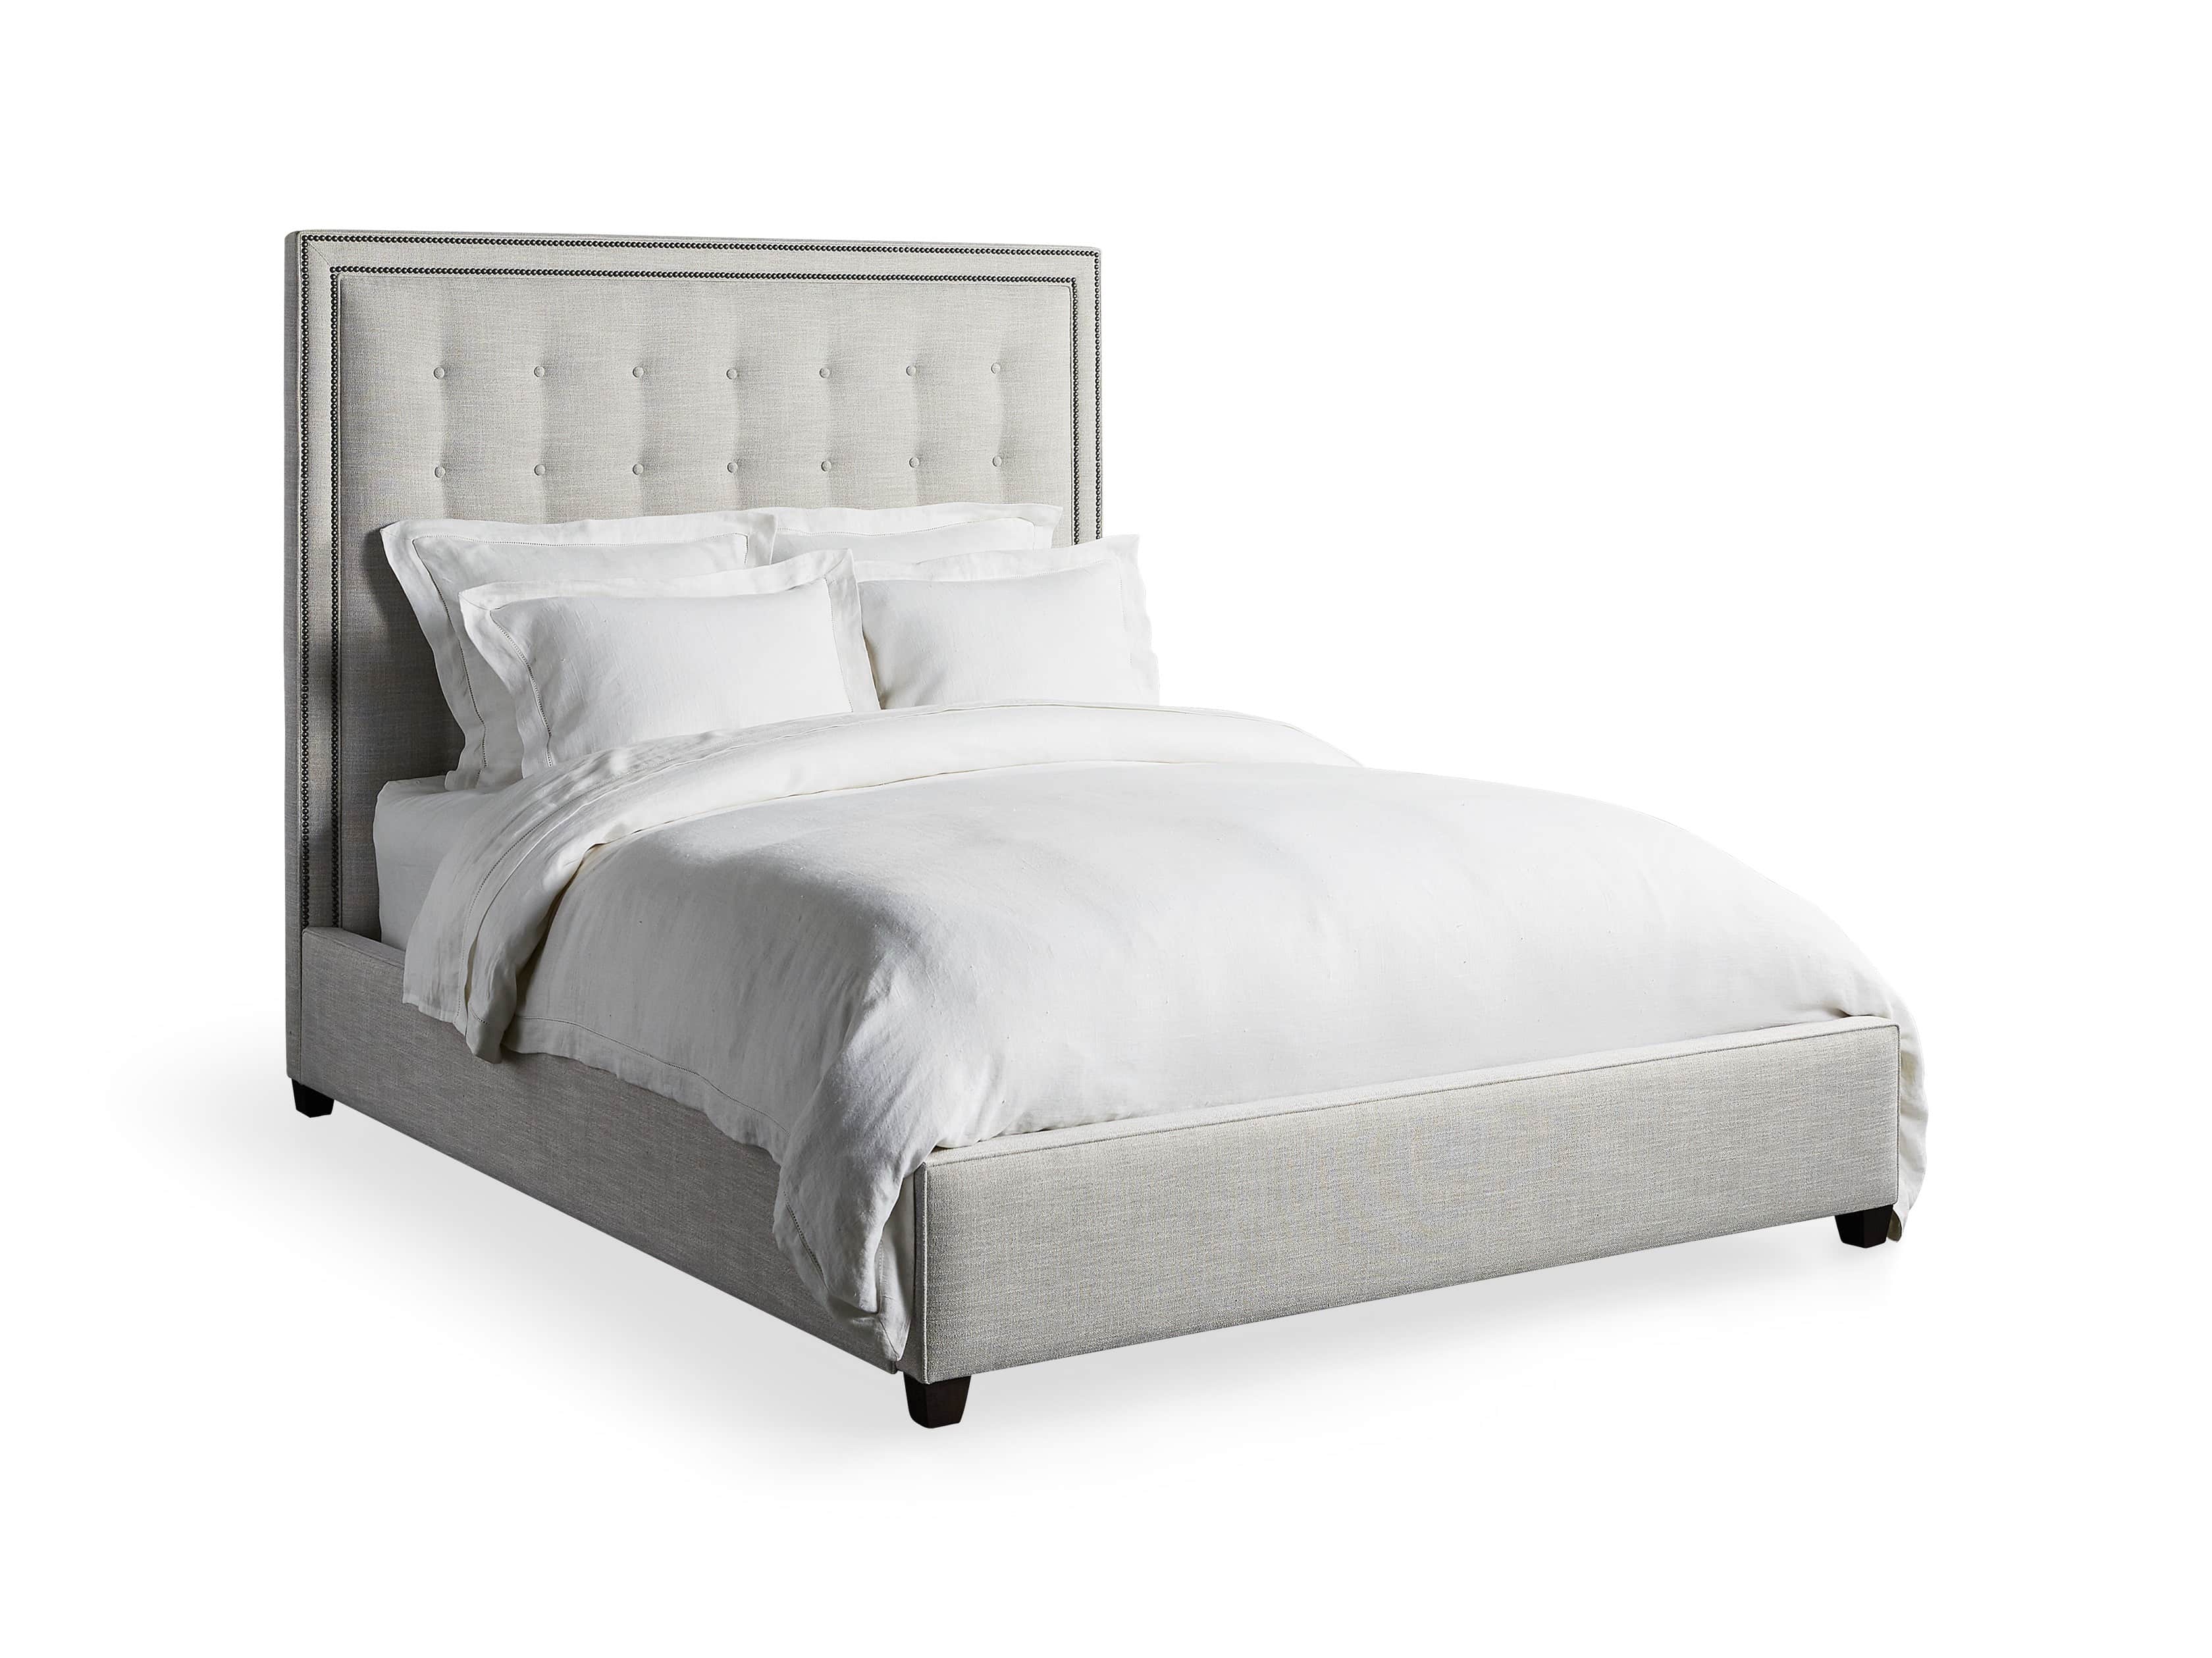 Felix Tufted Bed Arhaus, Full Size Tufted Bed Frame